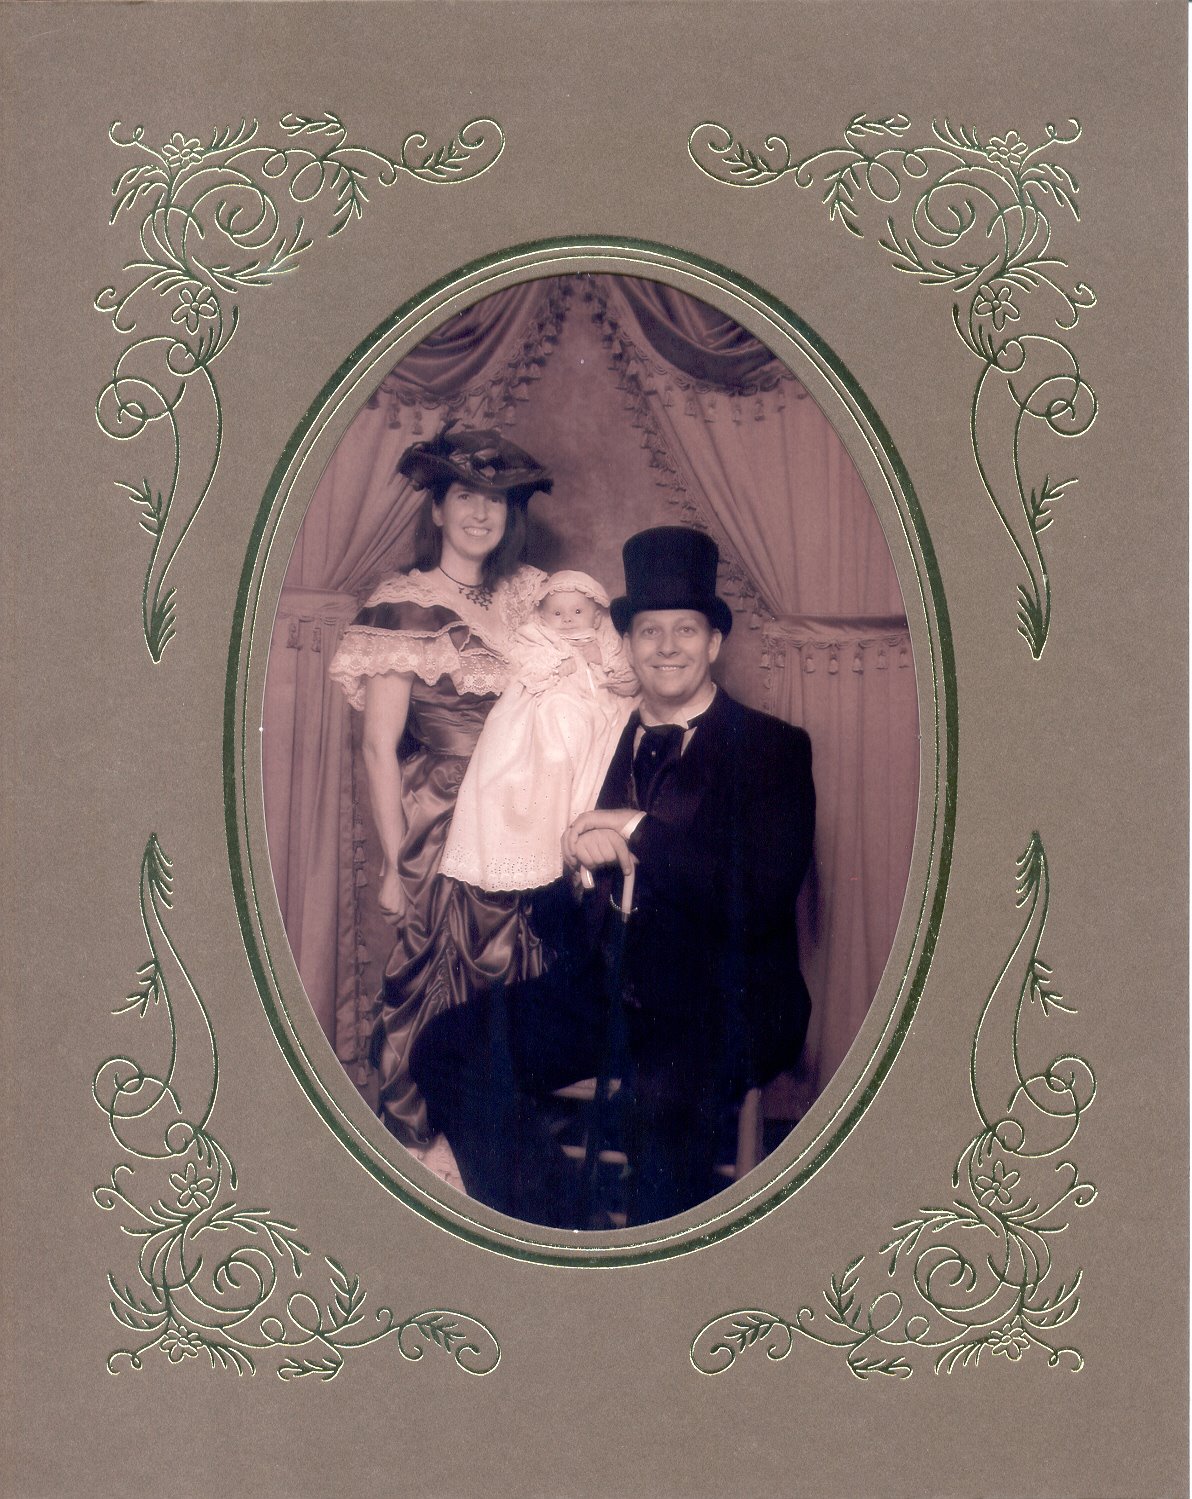 [Old+Time+Family+Photo.jpg]